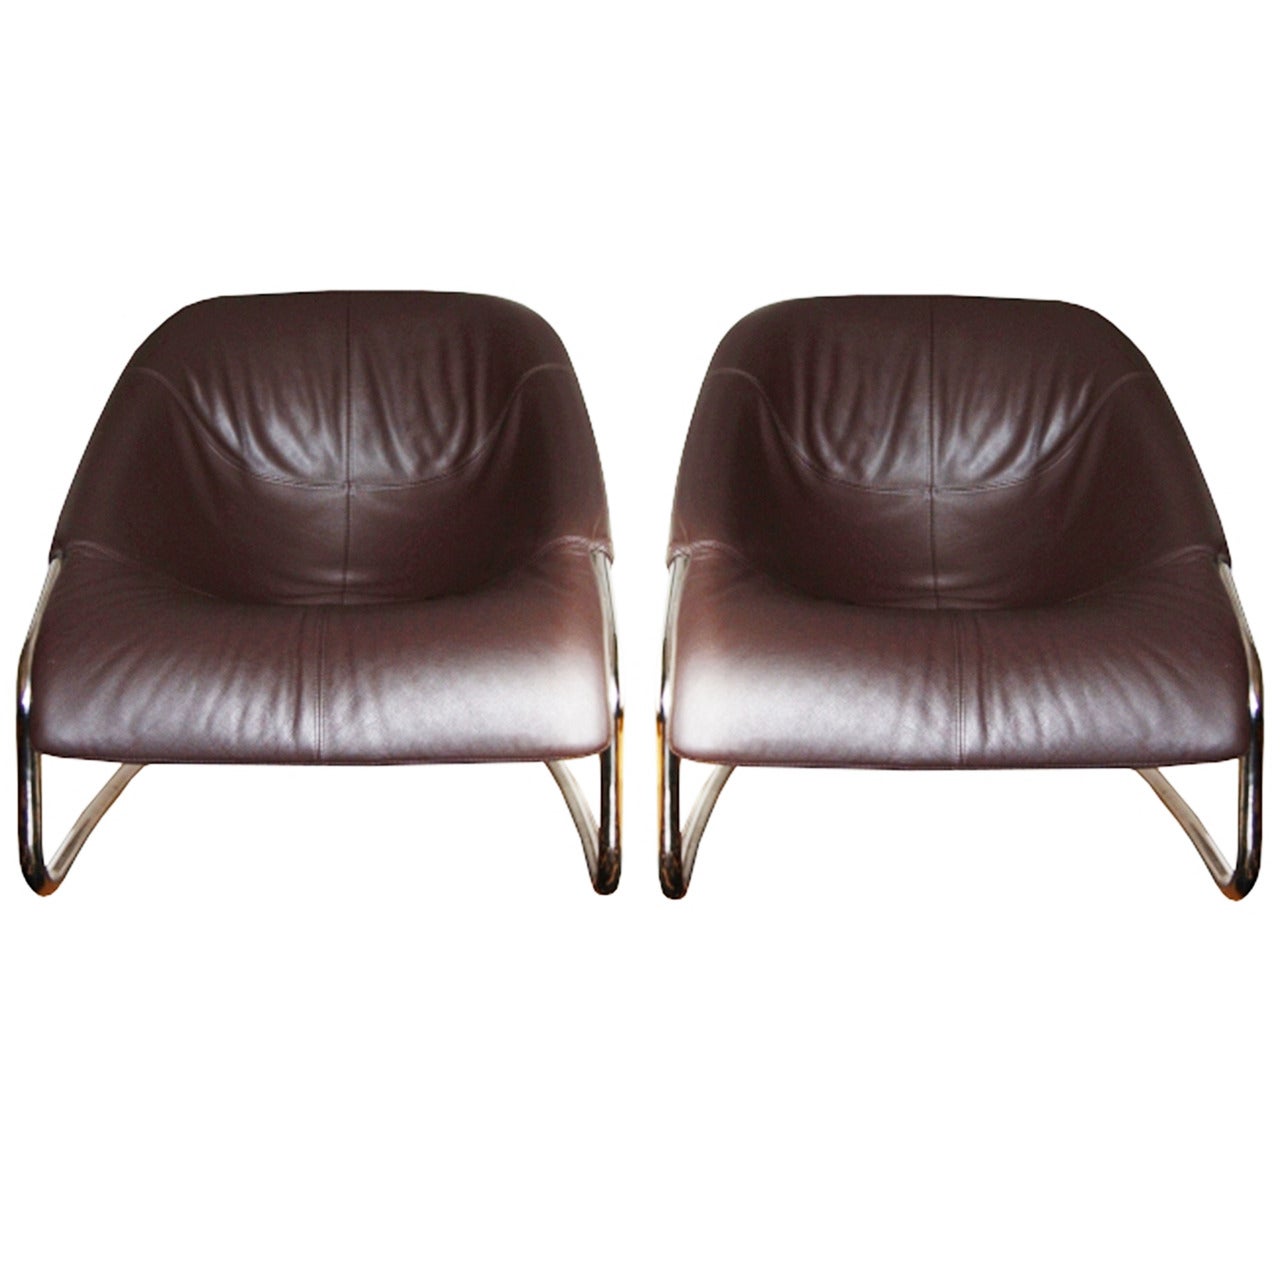 Pair of "Cortina" Chairs Designed by Gordon Guillaumier for Minotti